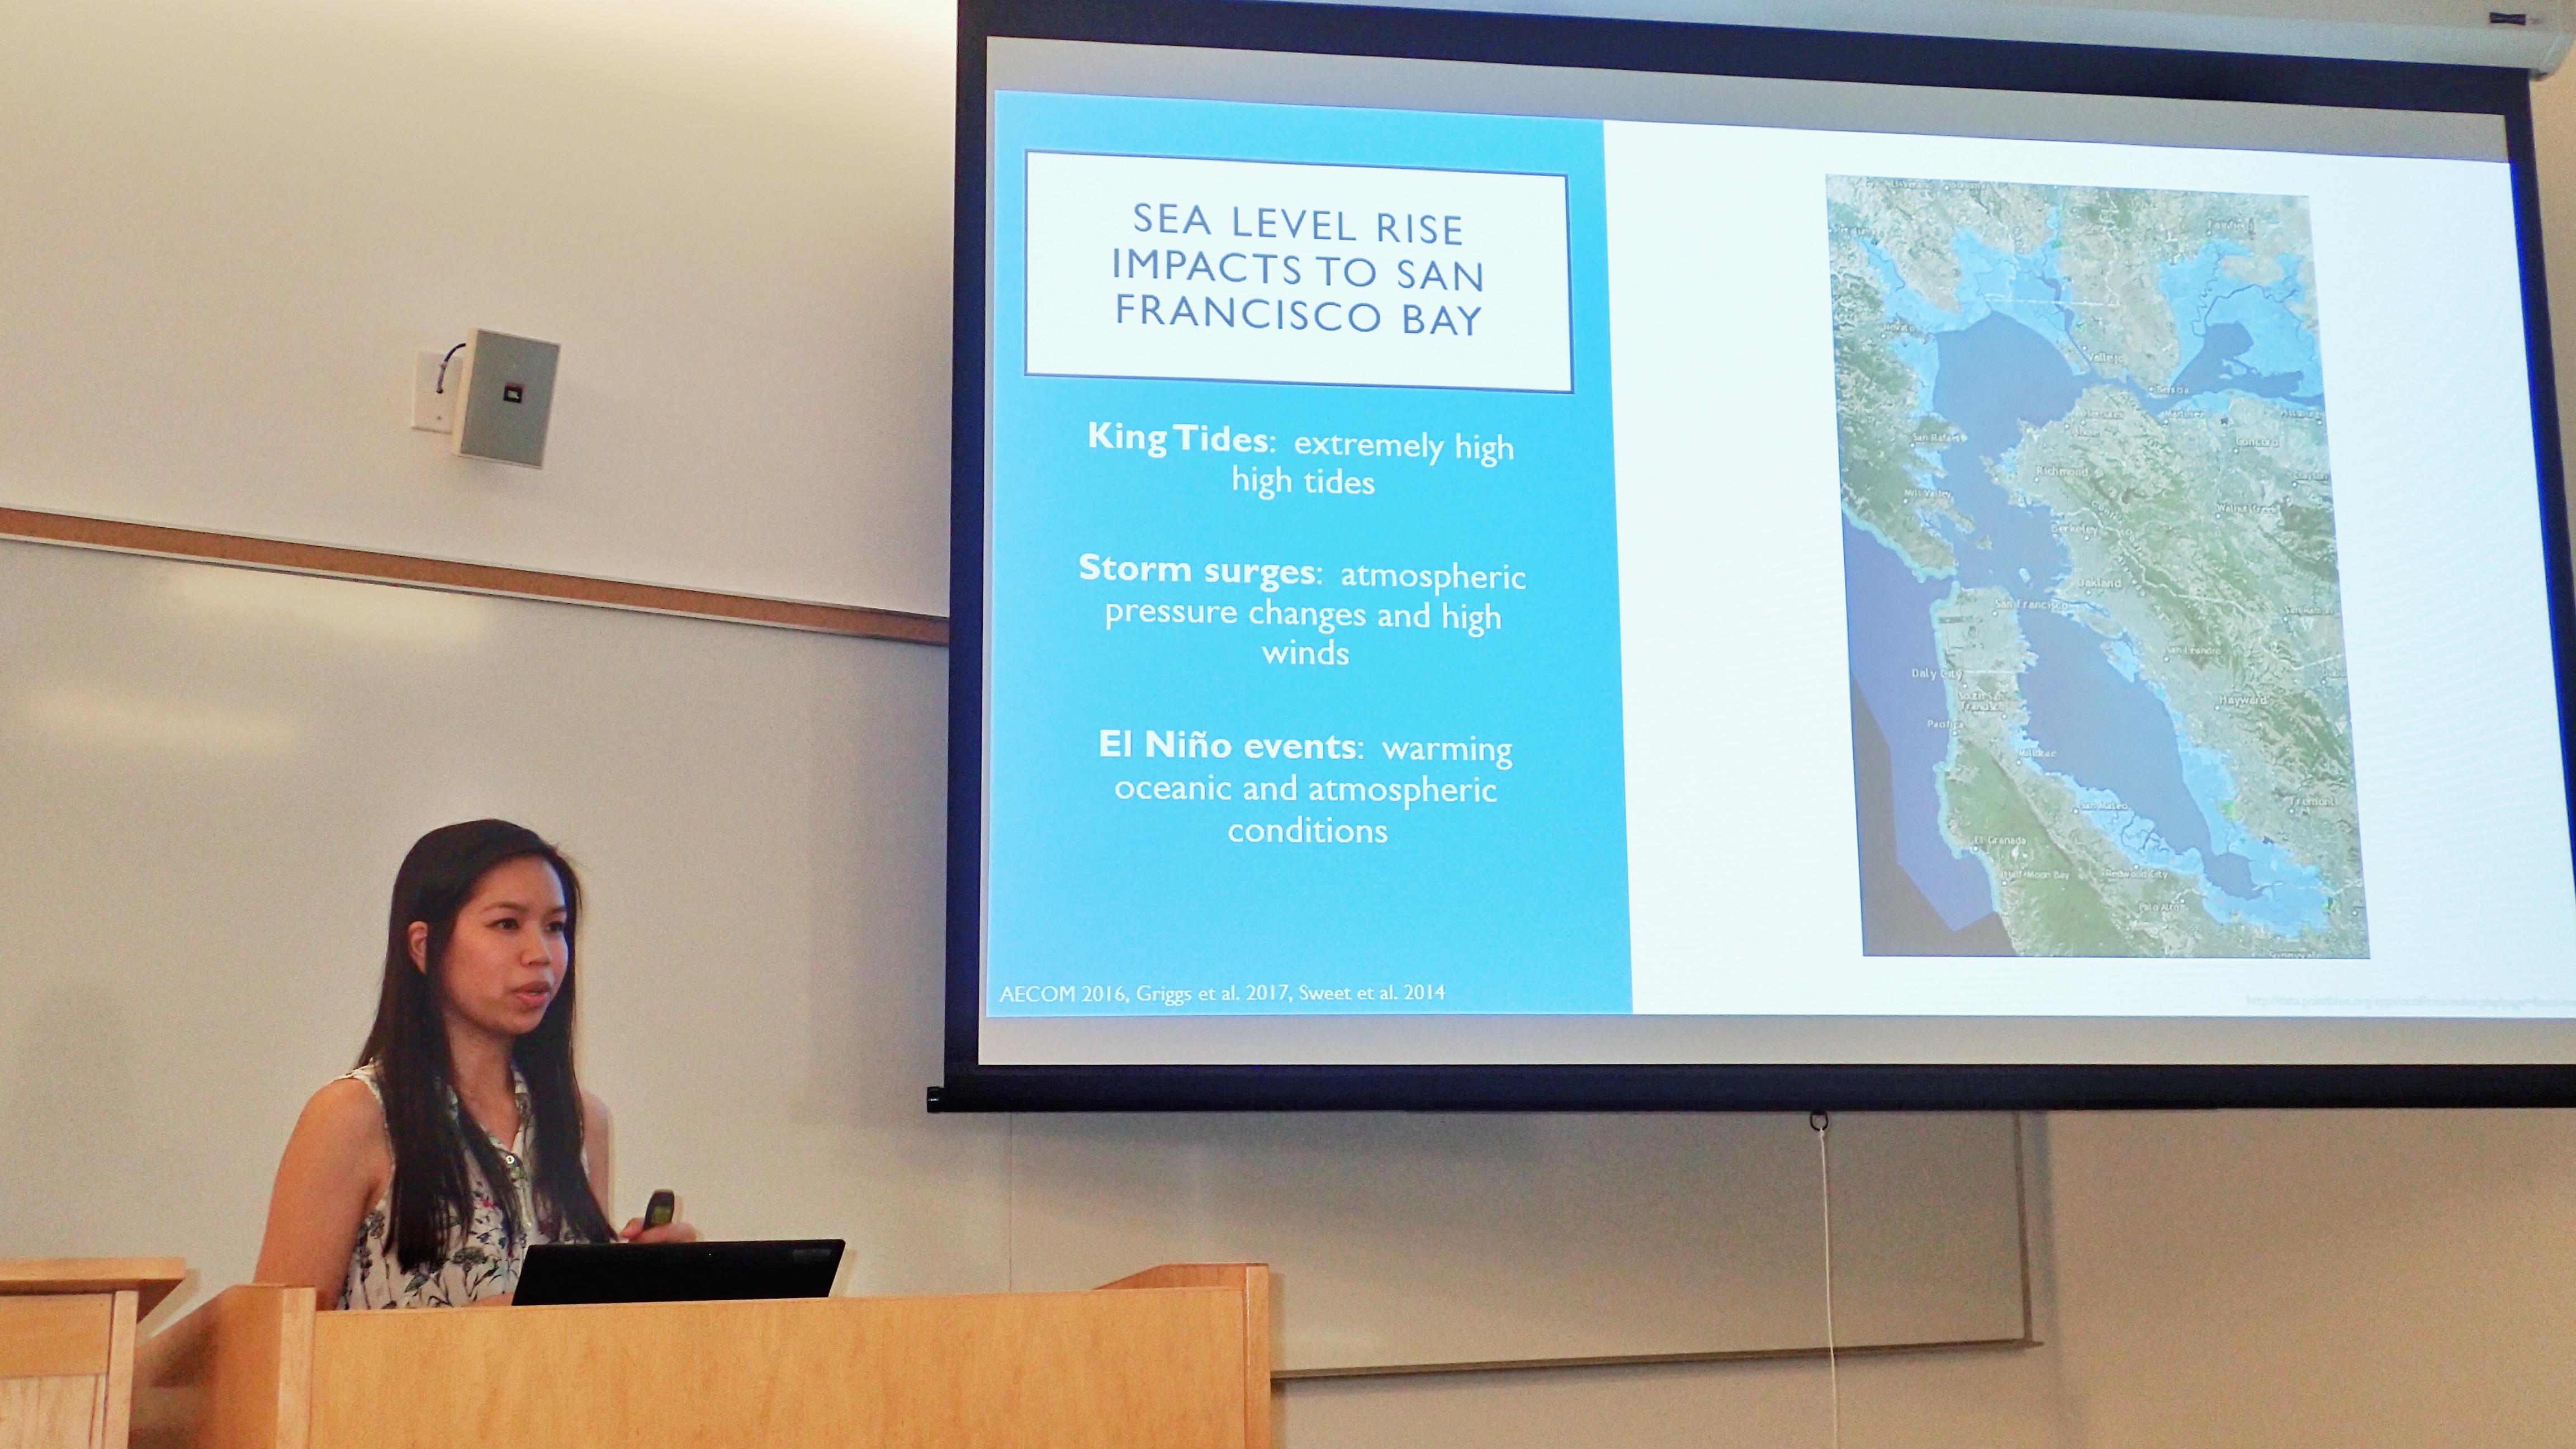 Presenting on my master’s project during grad school that analyzed sea level rise adaptation strategies for the San Francisco Bay. Photo credit: Gretchen Coffman